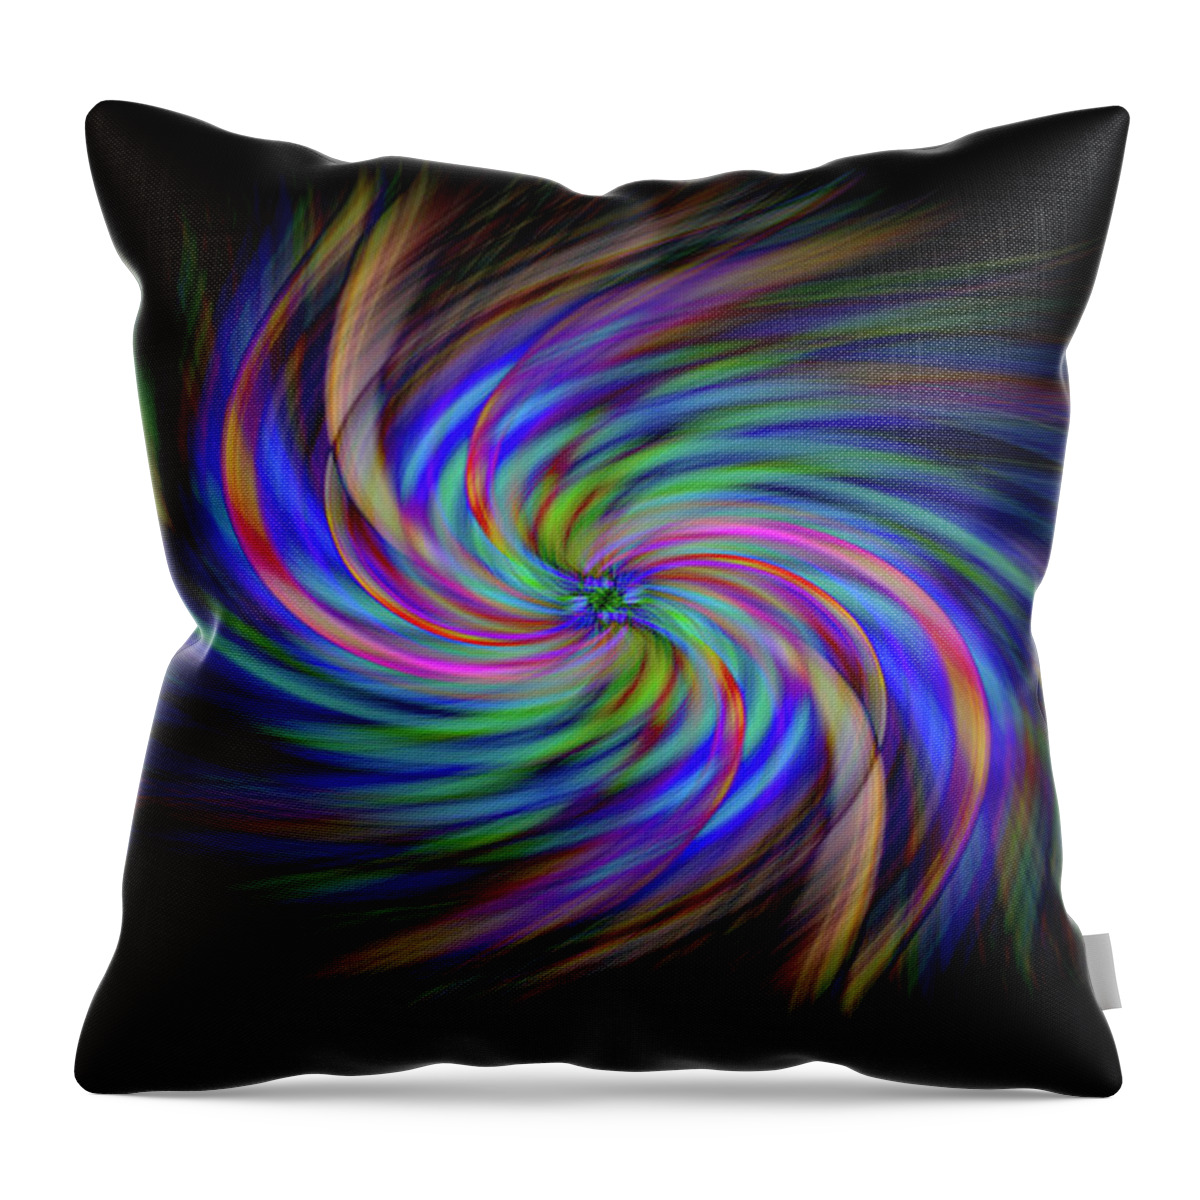 Abstracts Throw Pillow featuring the photograph Light Abstract 2 by Kenny Thomas